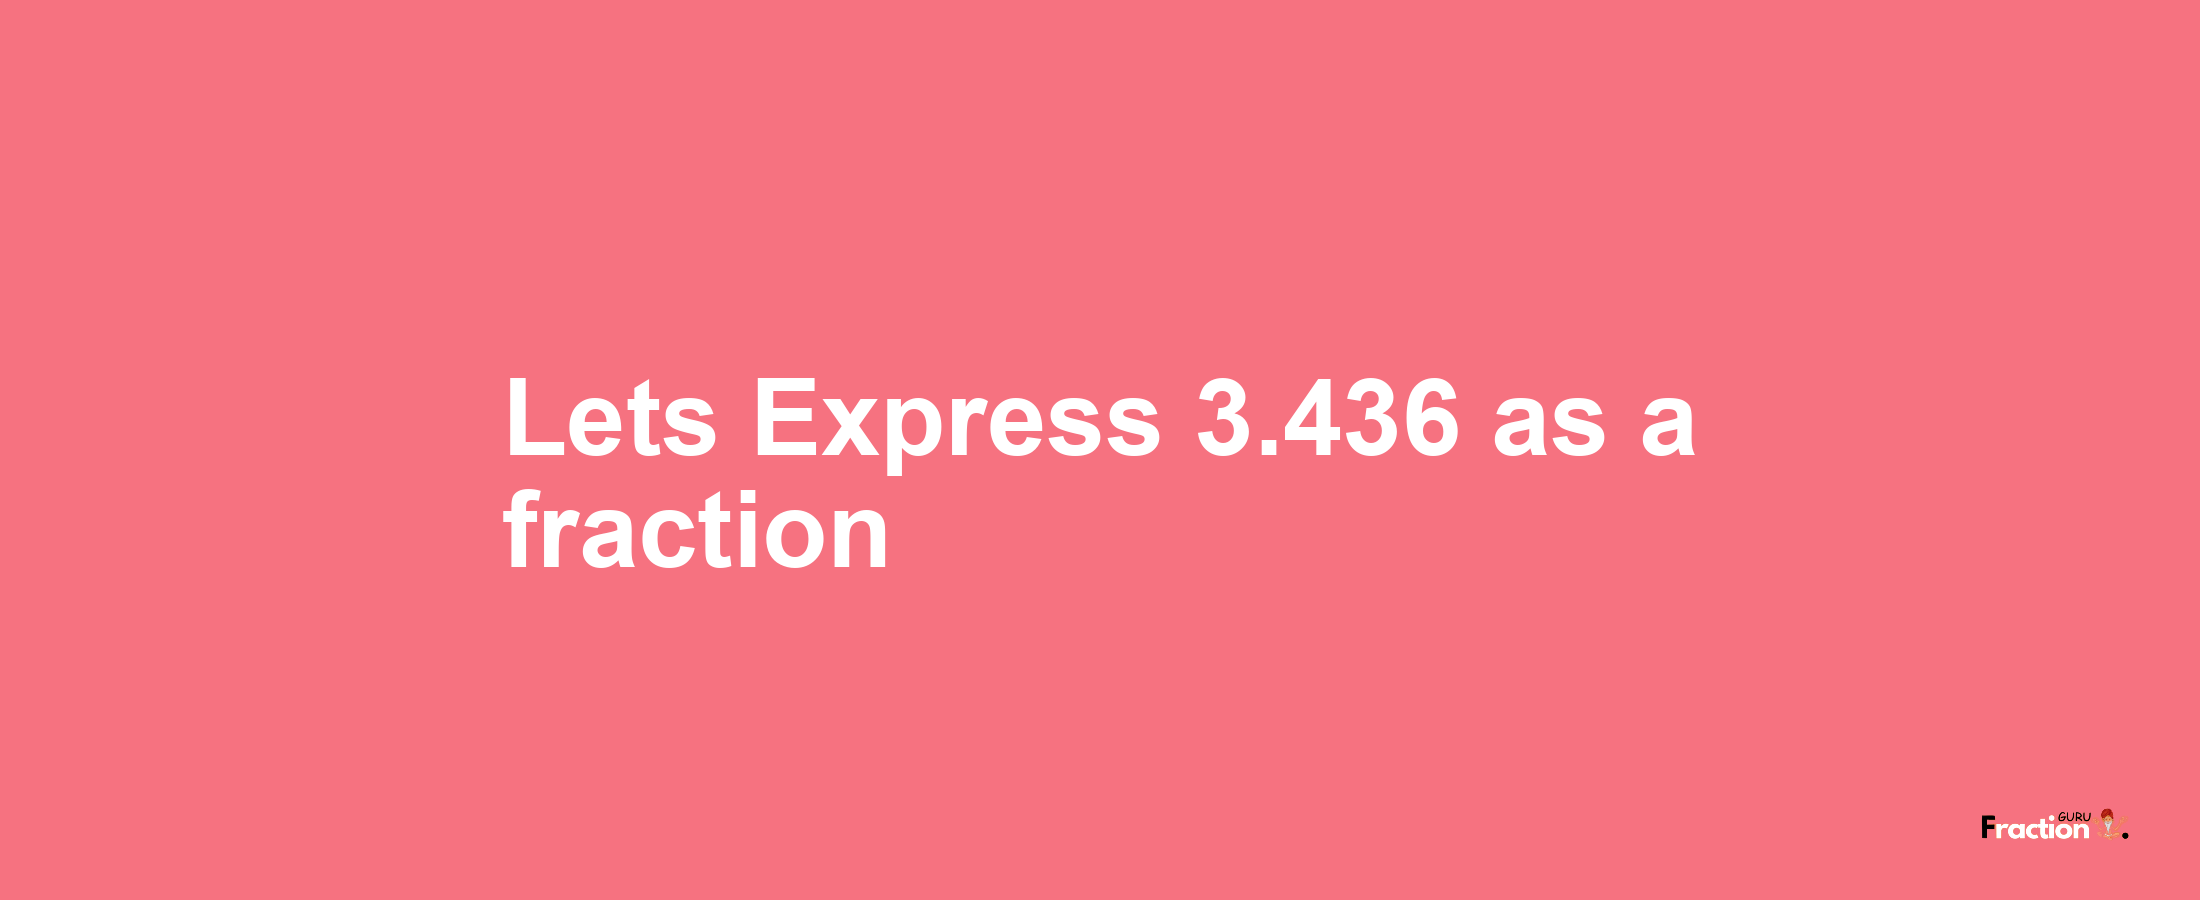 Lets Express 3.436 as afraction